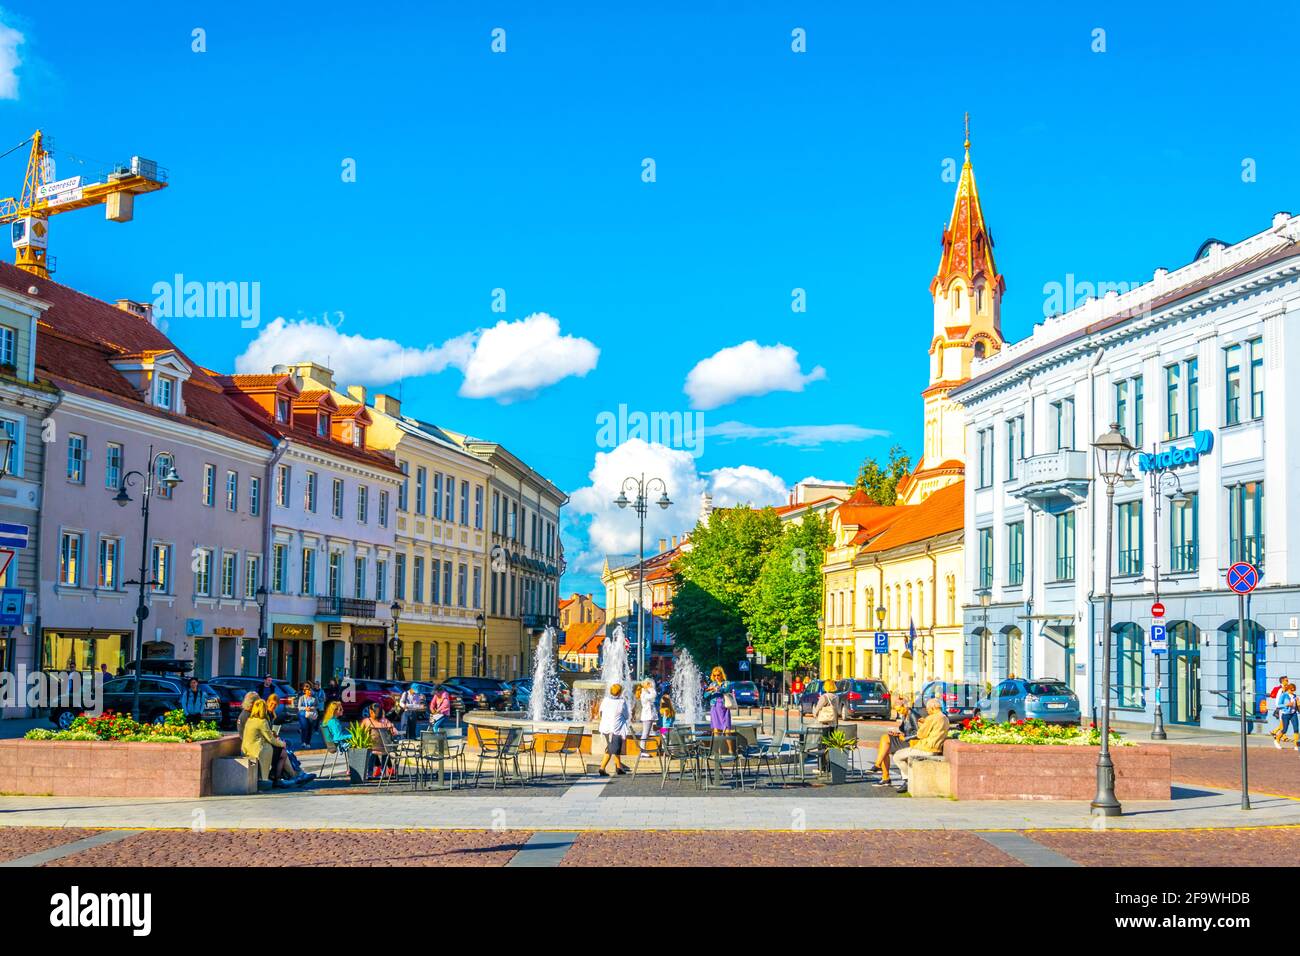 VILNIUS, LITHUANIA, AUGUST 14, 2016: People are strolling through Rotuses aikste - the town hall square of the lithuanian capital Vilnius, Lithuania Stock Photo